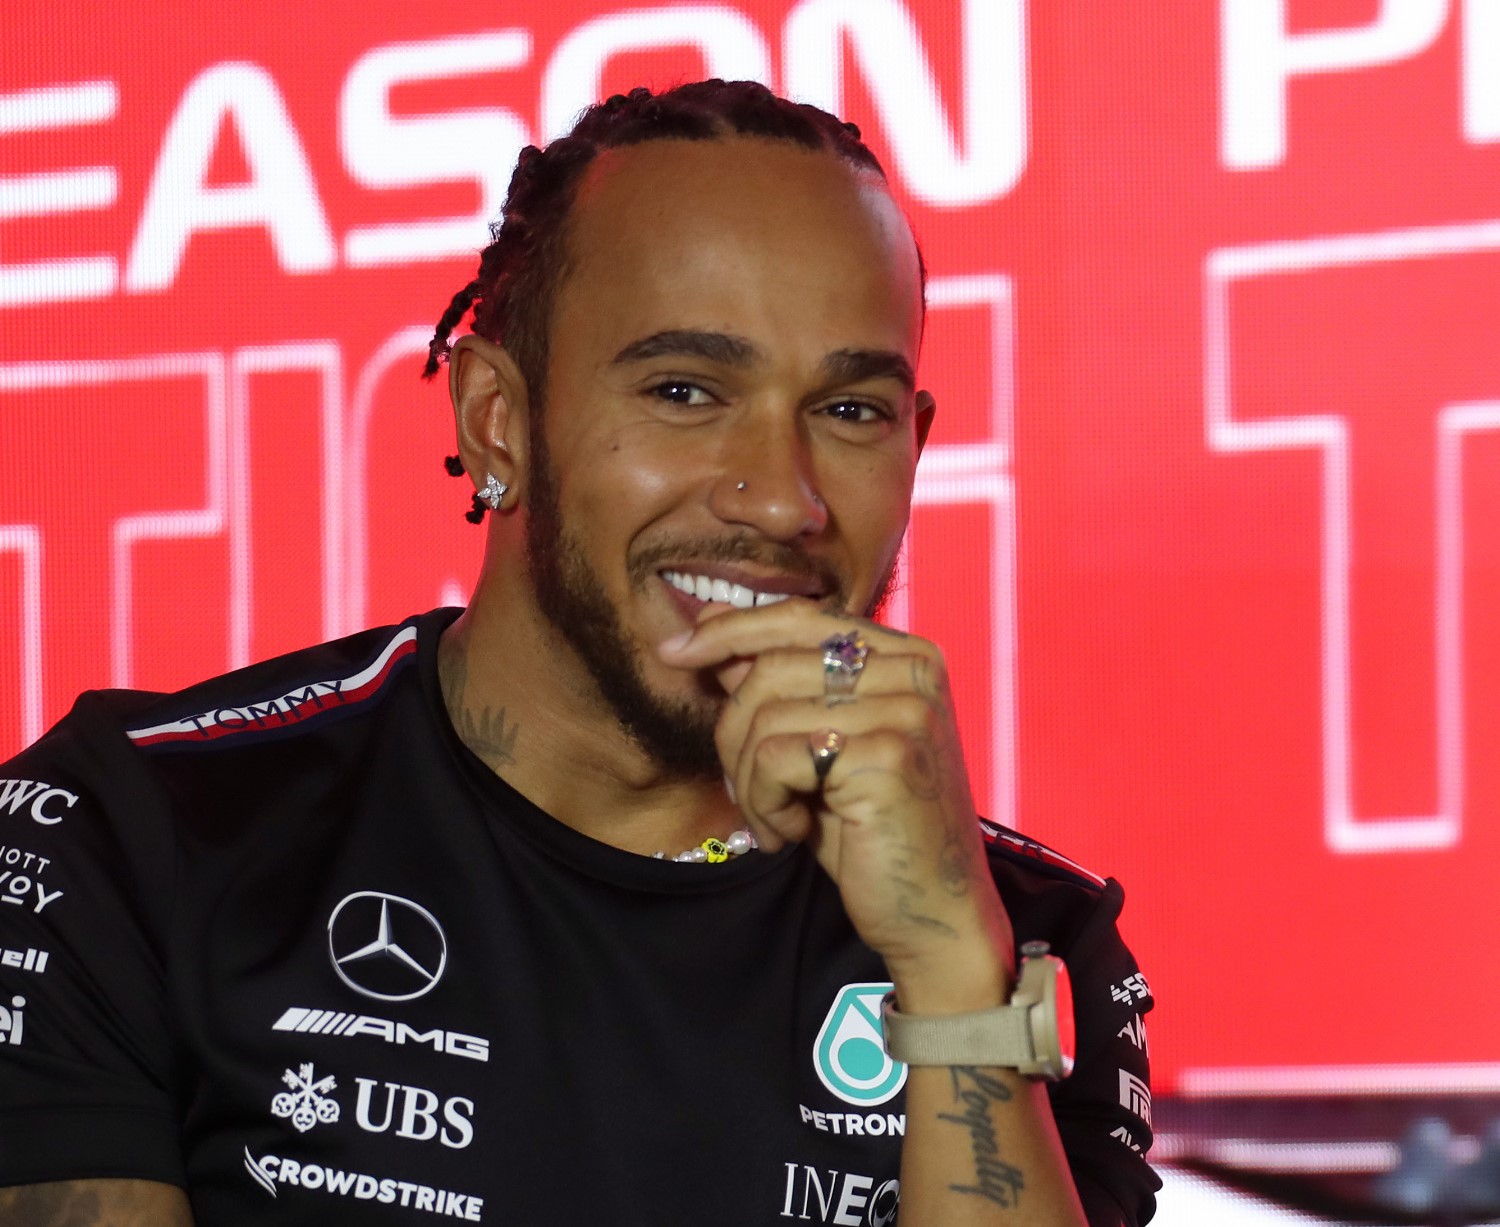 Lewis Hamilton laughs when hearing that Massa's lawyers want his help in taking away his own 2008 driver title. (Photo by Peter Fox/Getty Images) // Getty Images / Red Bull Content Pool